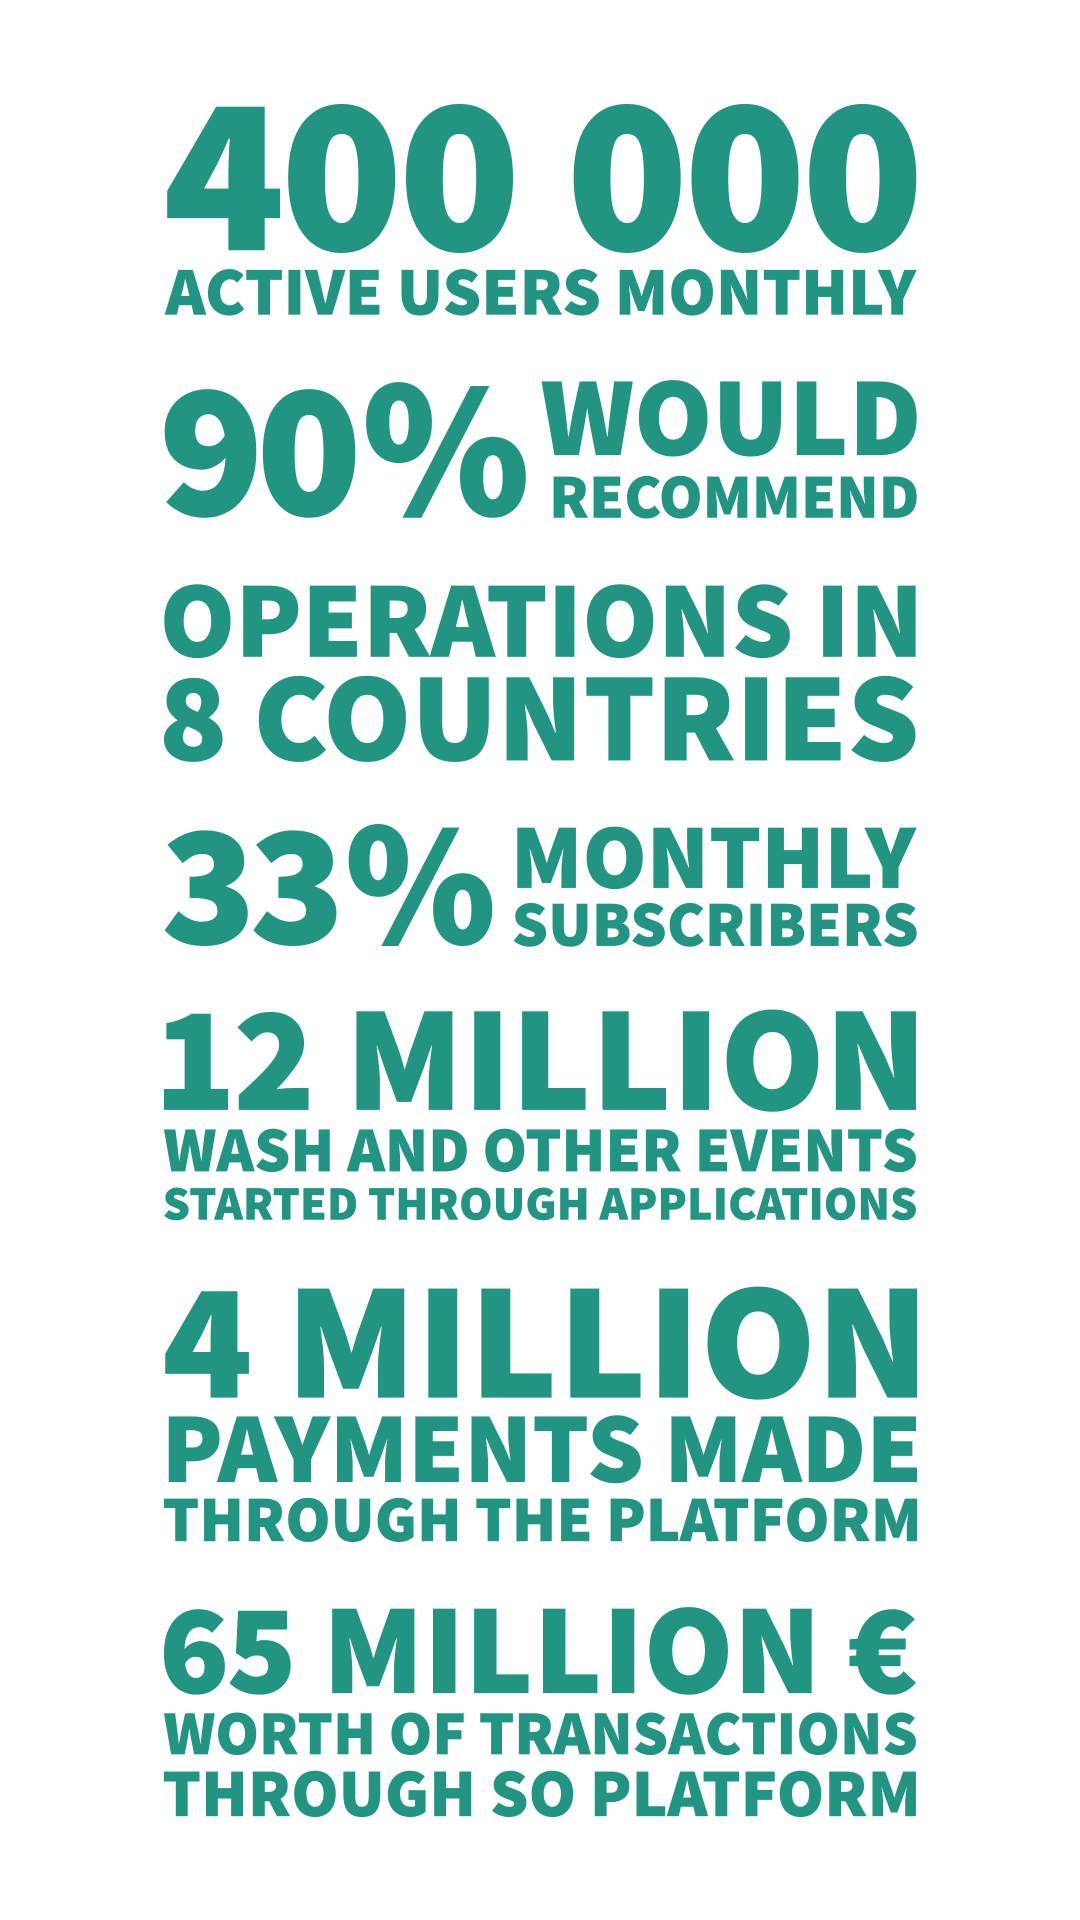 Superoperator Facts & Figures graphic